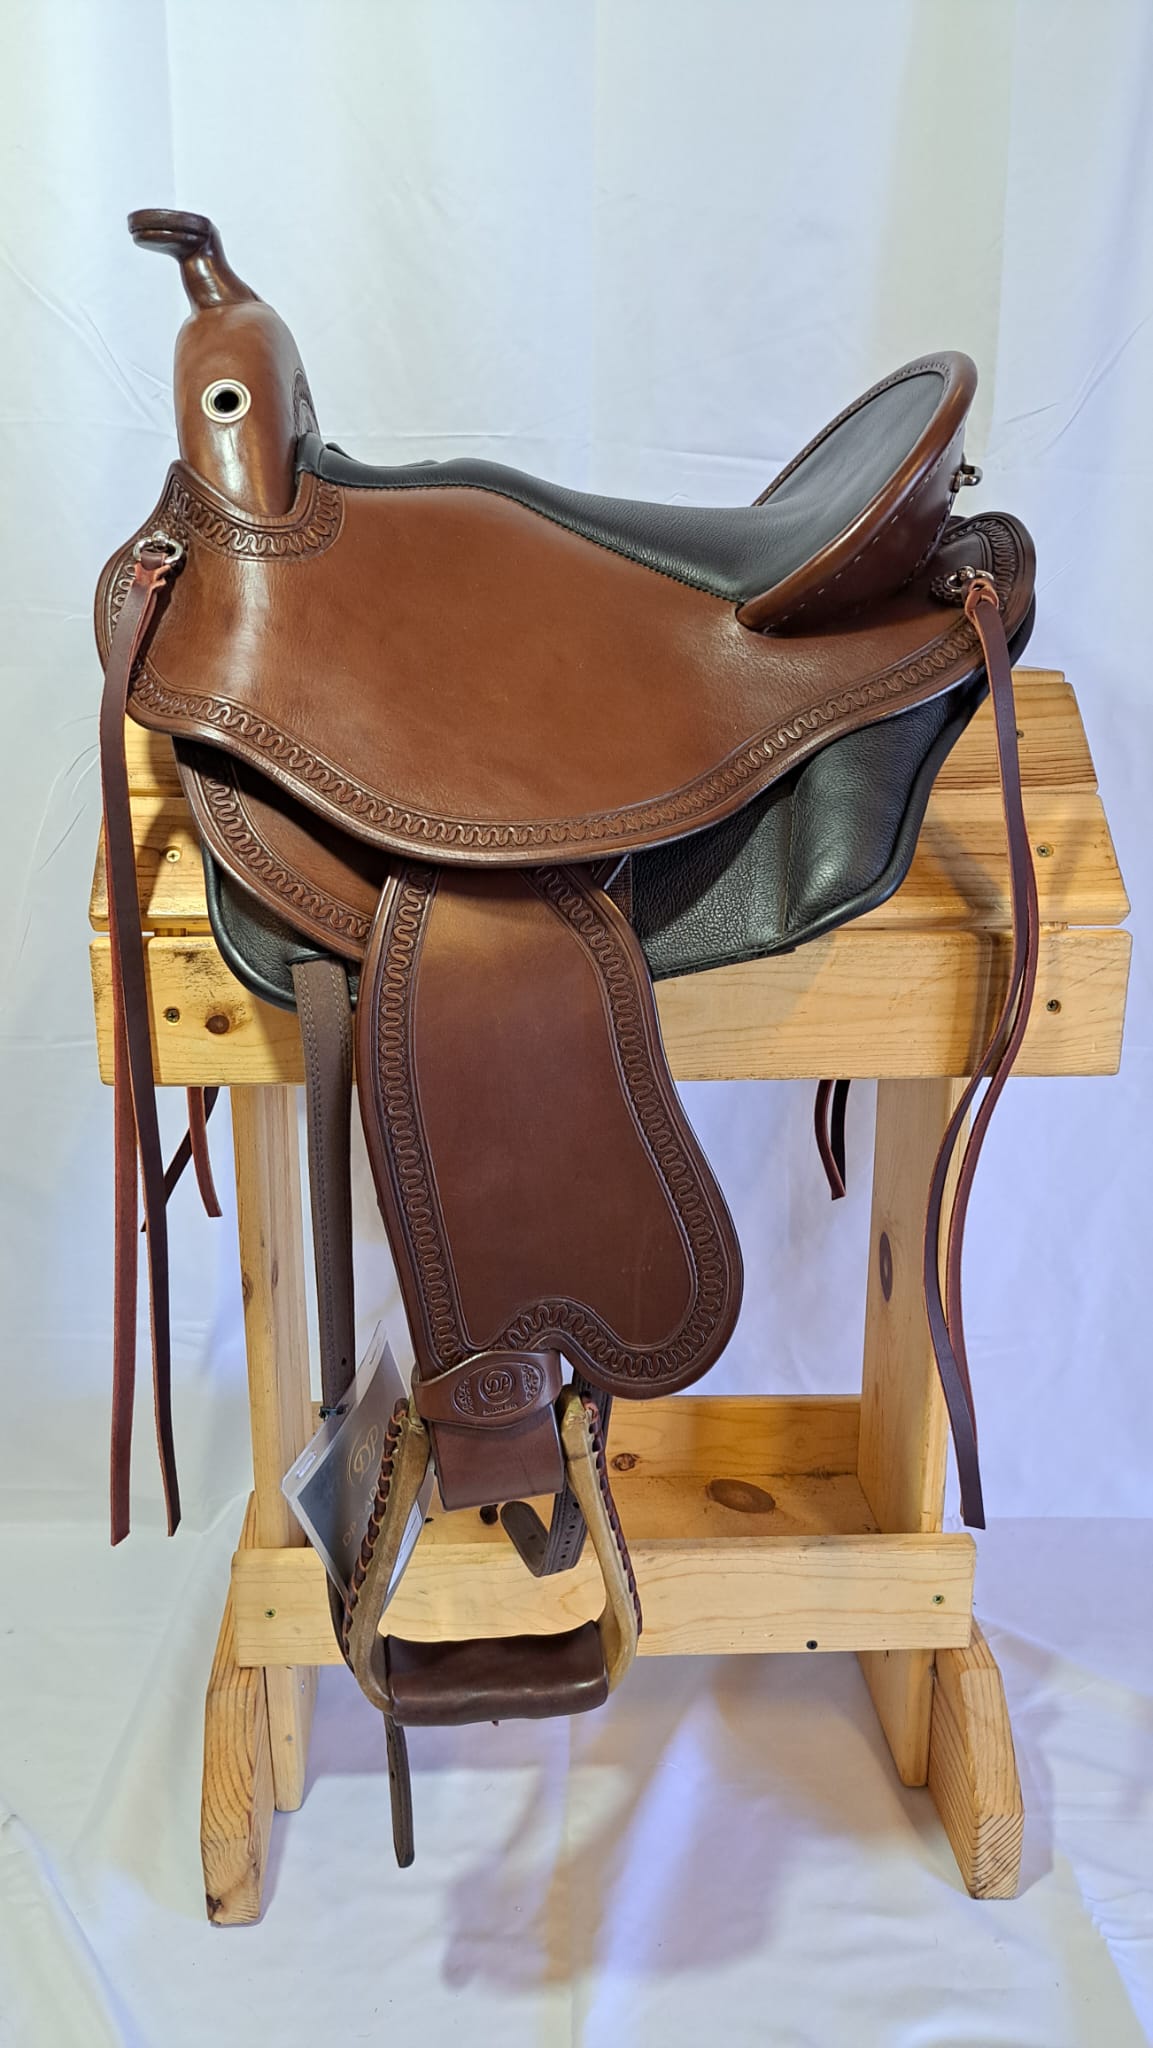 USED/DEMO Quantum Western Size 1 - Western Dressage Seat